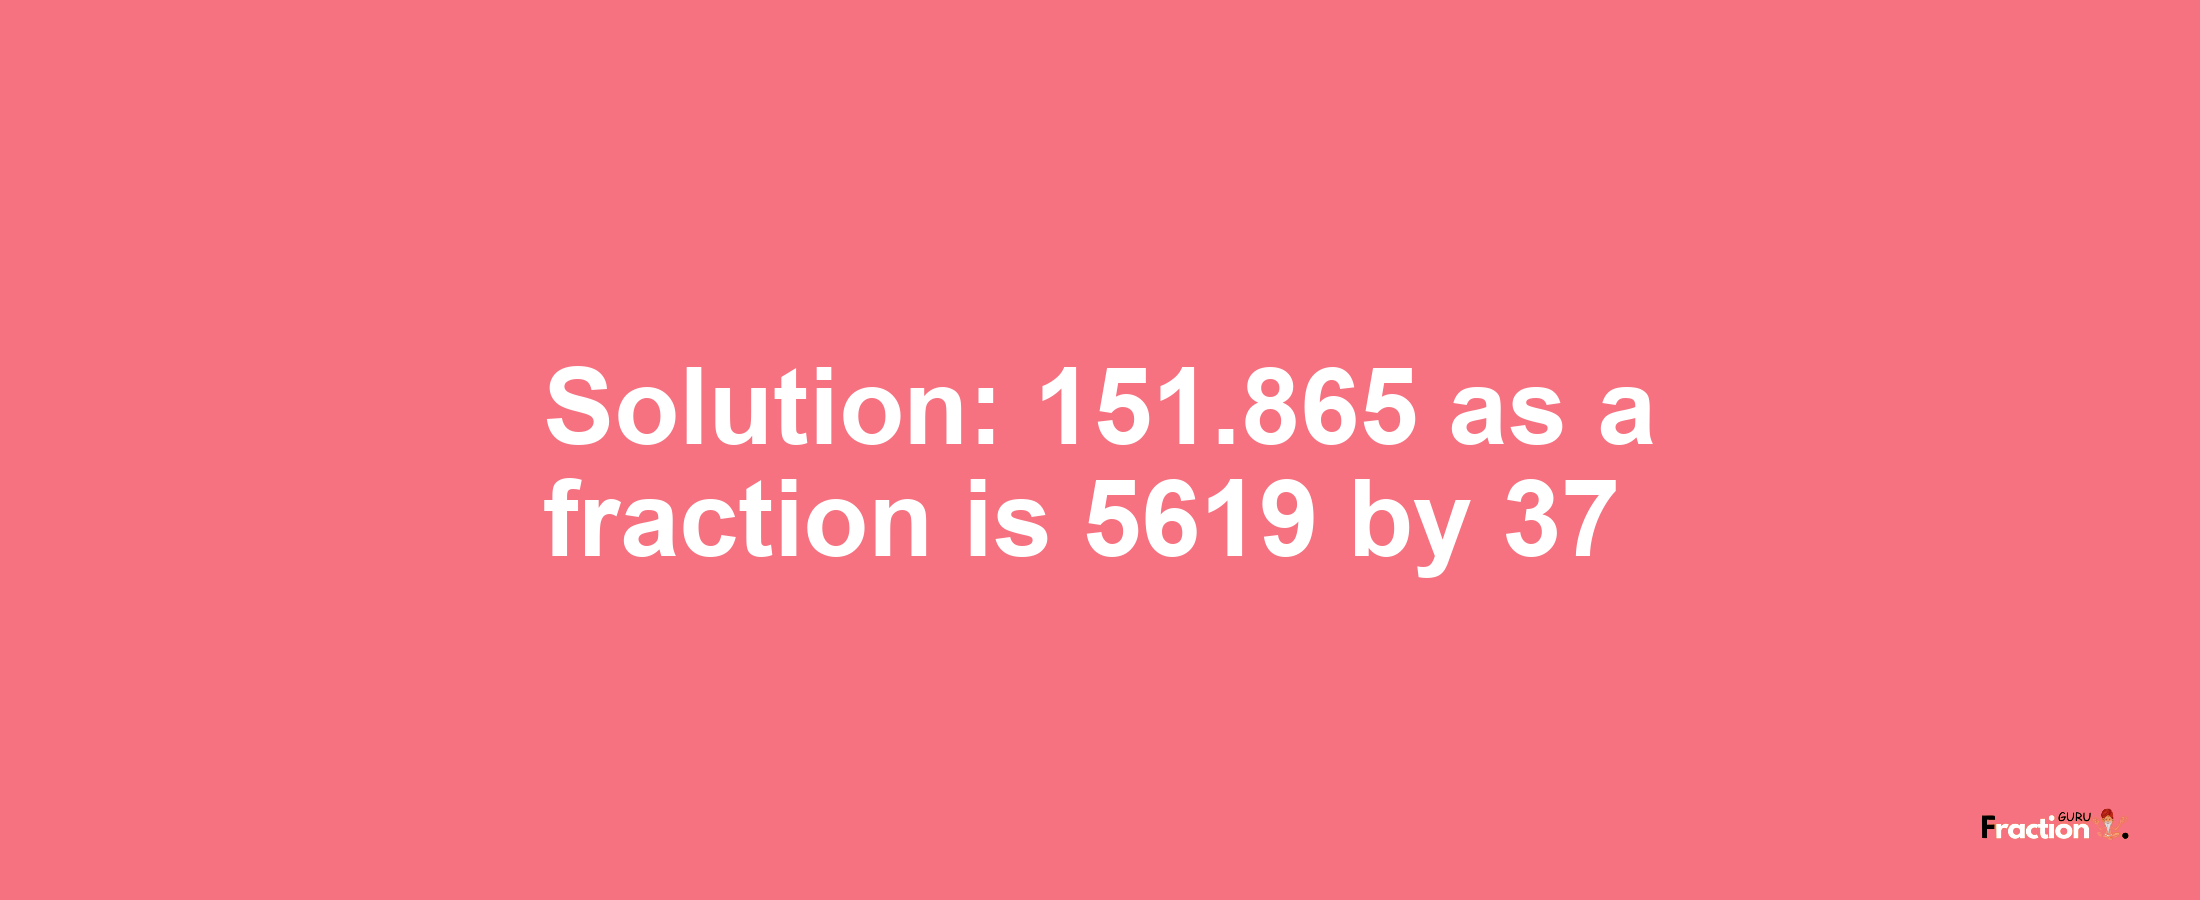 Solution:151.865 as a fraction is 5619/37